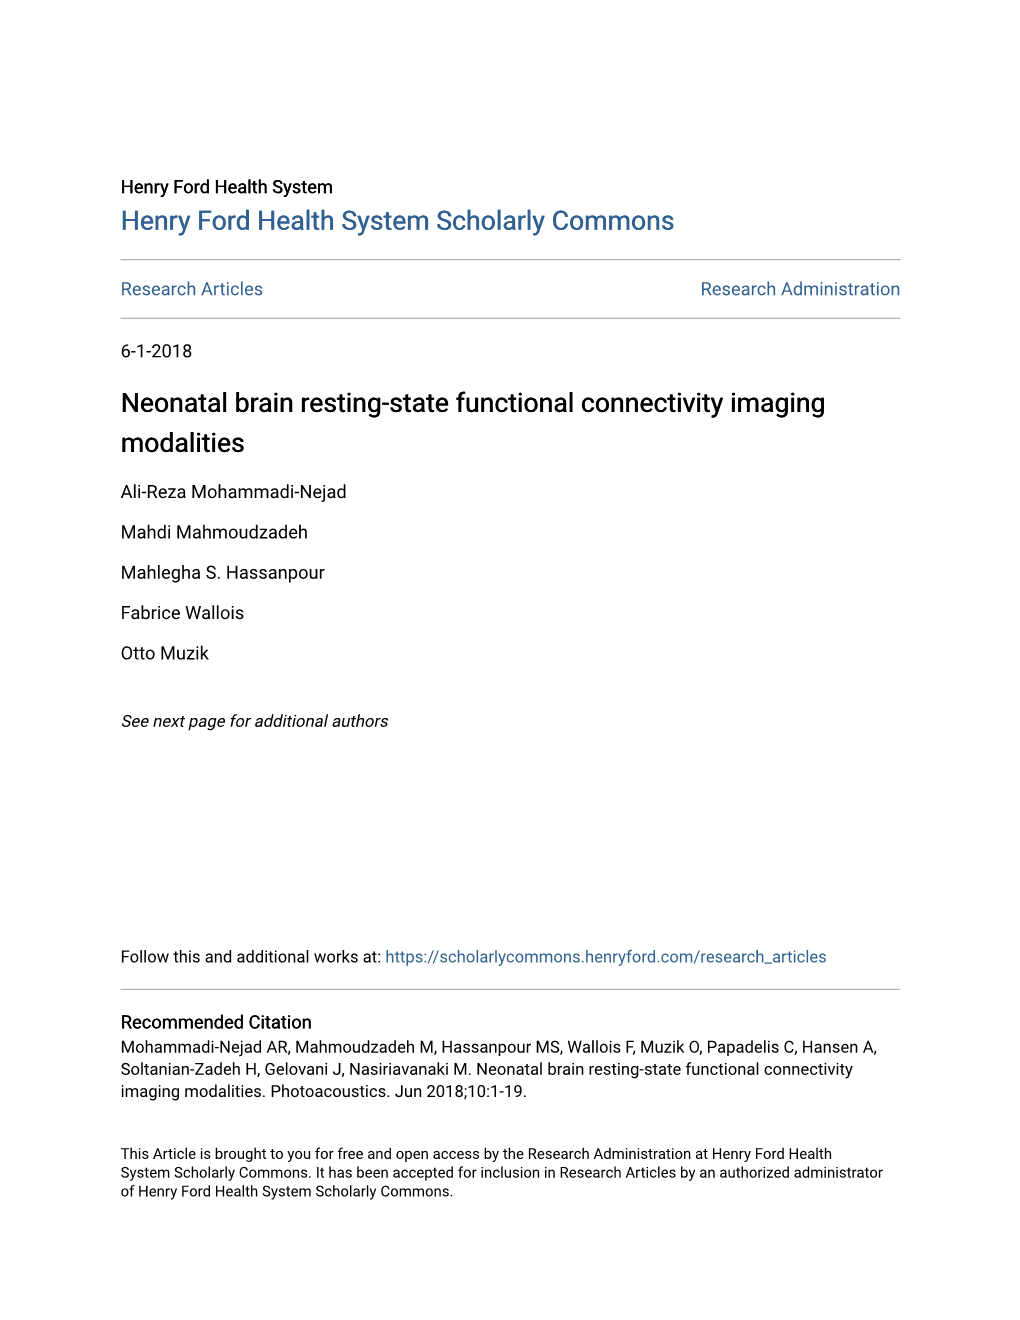 Neonatal Brain Resting-State Functional Connectivity Imaging Modalities